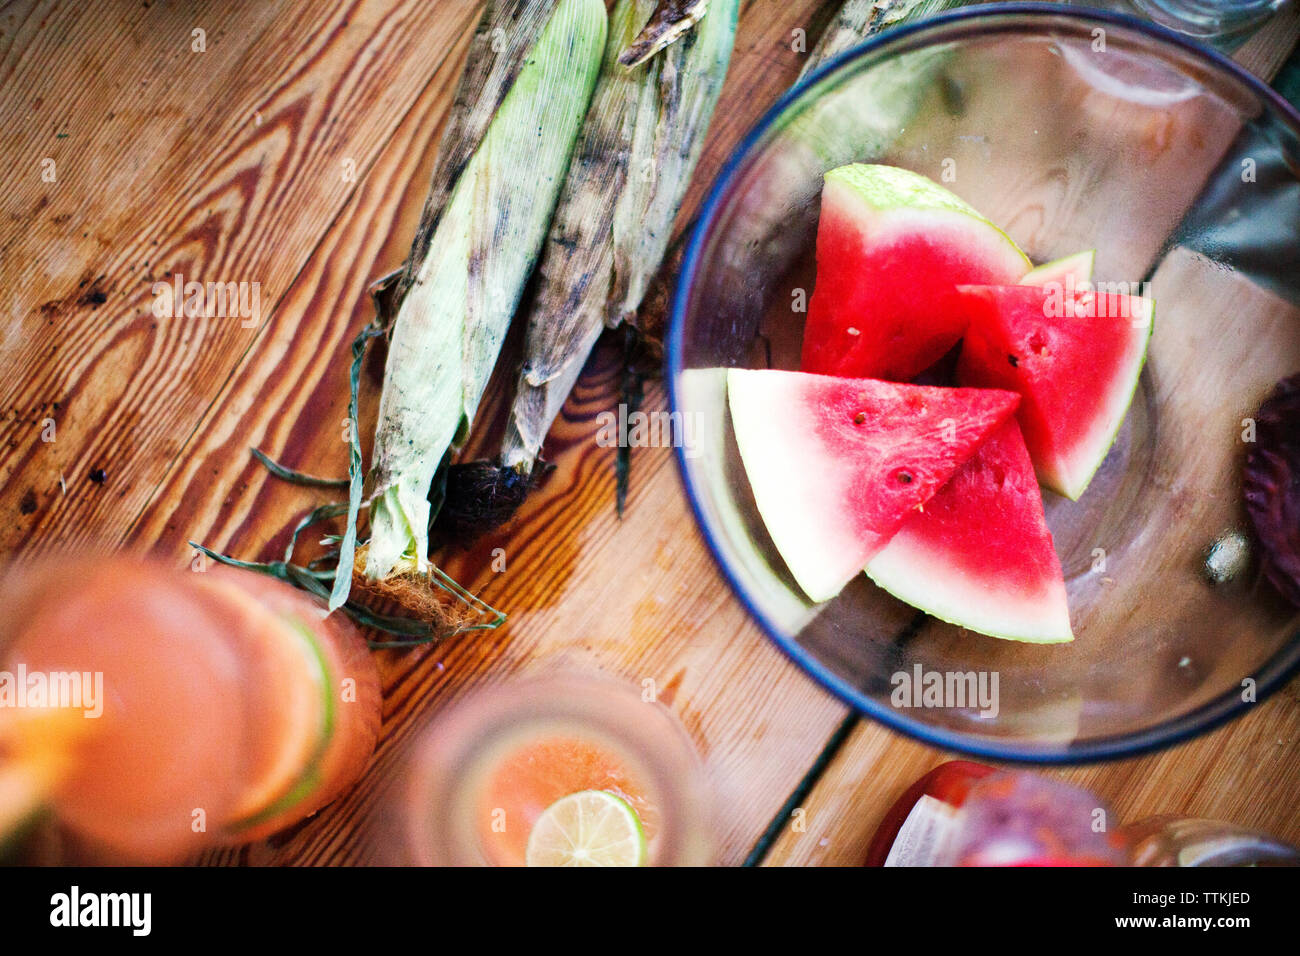 Overhead view of watermelon slices in bowl by corns on table Stock Photo